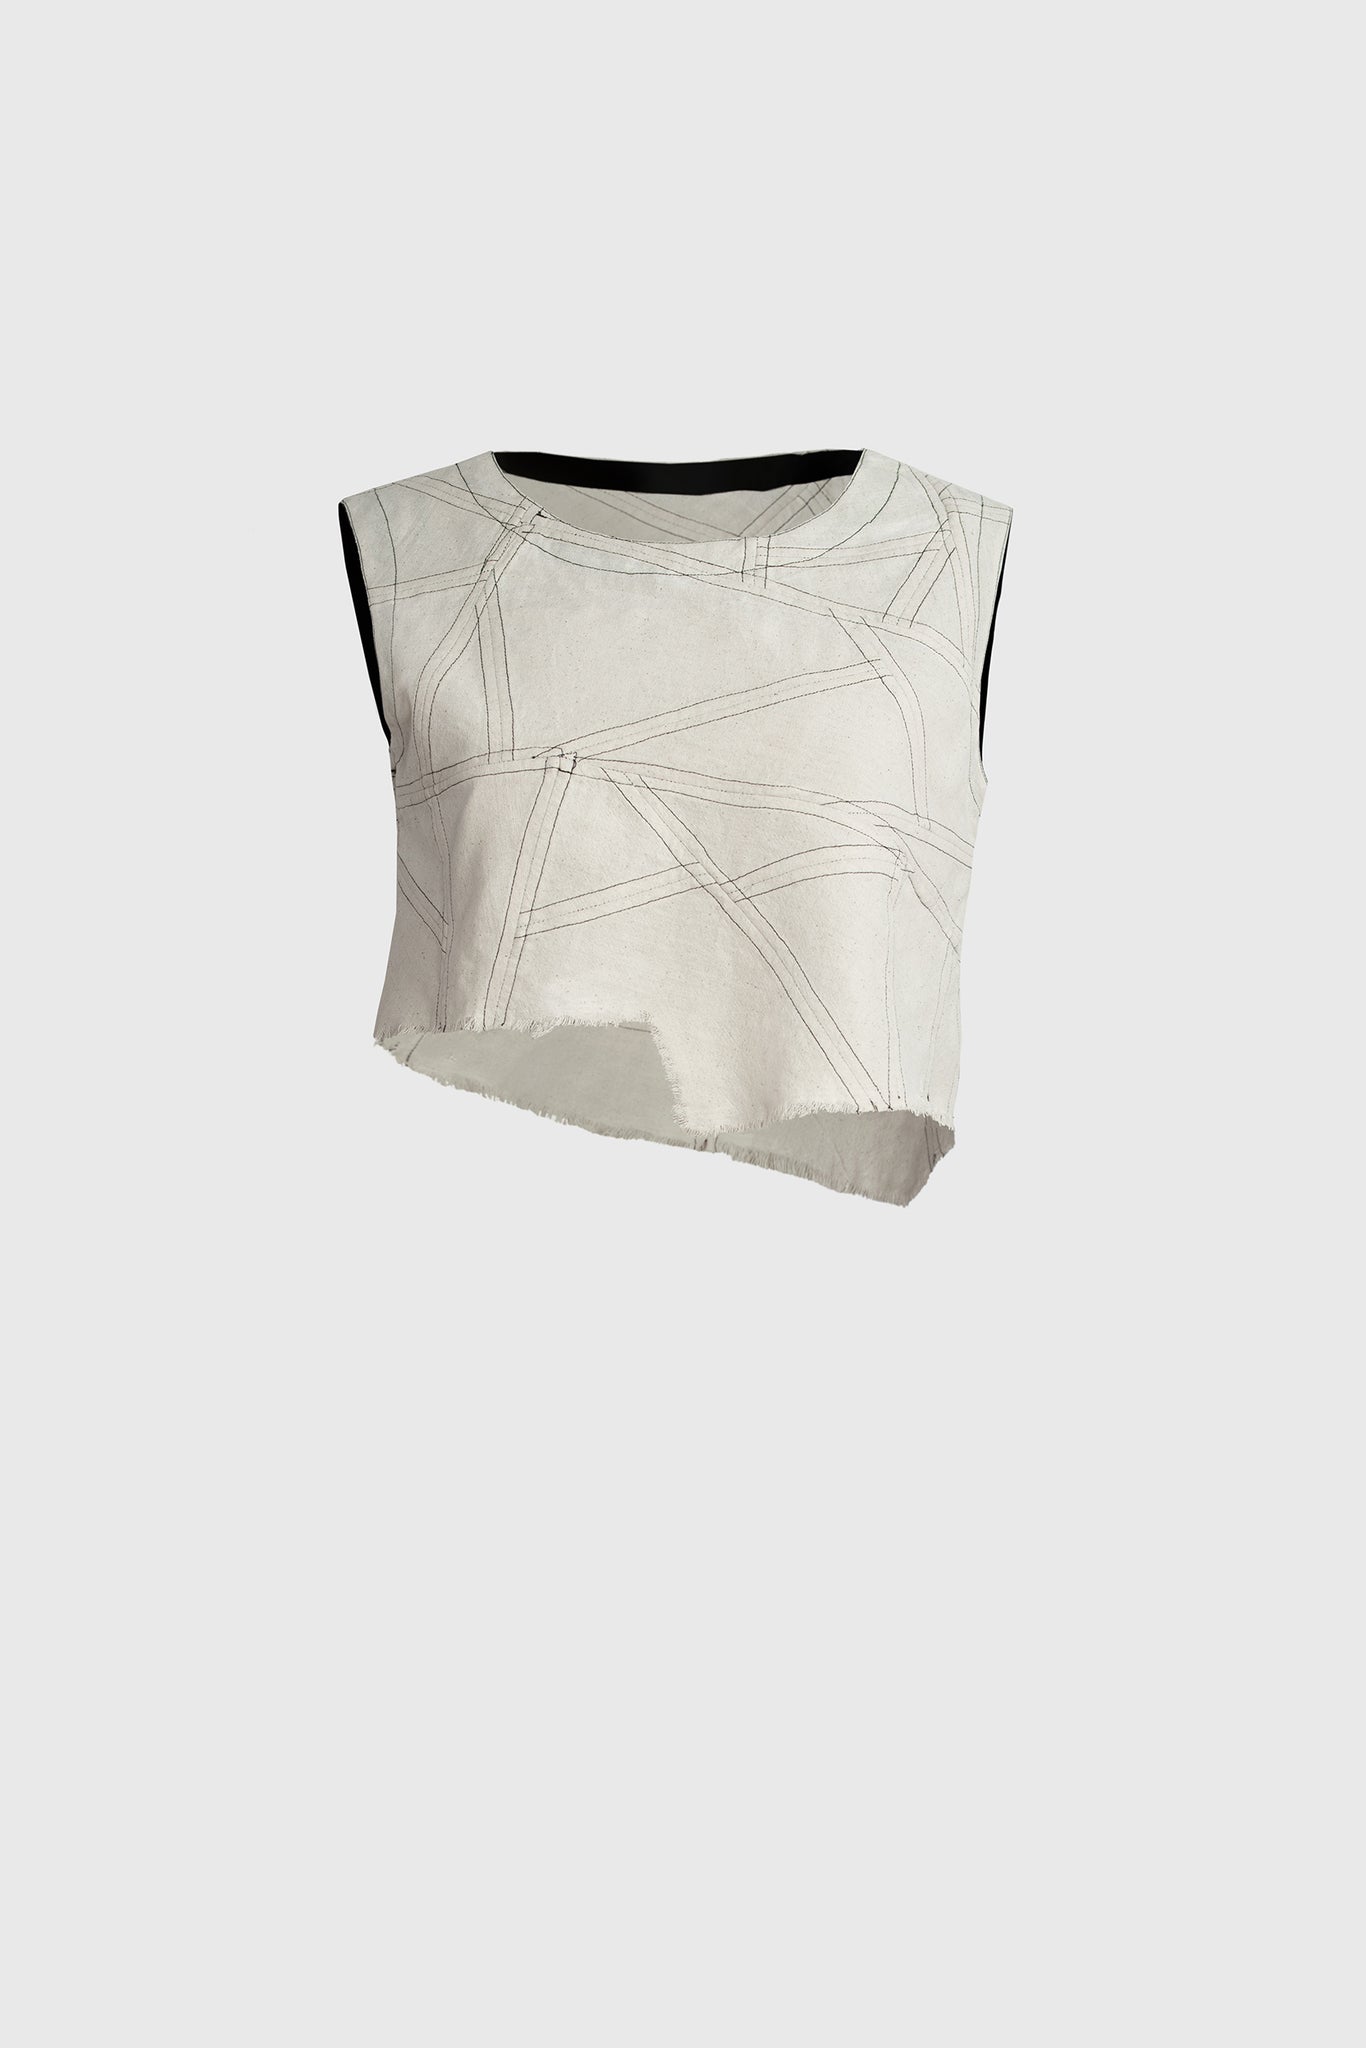 Ruxandra designed asymmetrical top, contrasting black over-thread detailing, white breathable cotton, round neckline, fringed lower hem, sleeveless, patchwork style, using recycled cotton, 90s feel, geometric look, double face